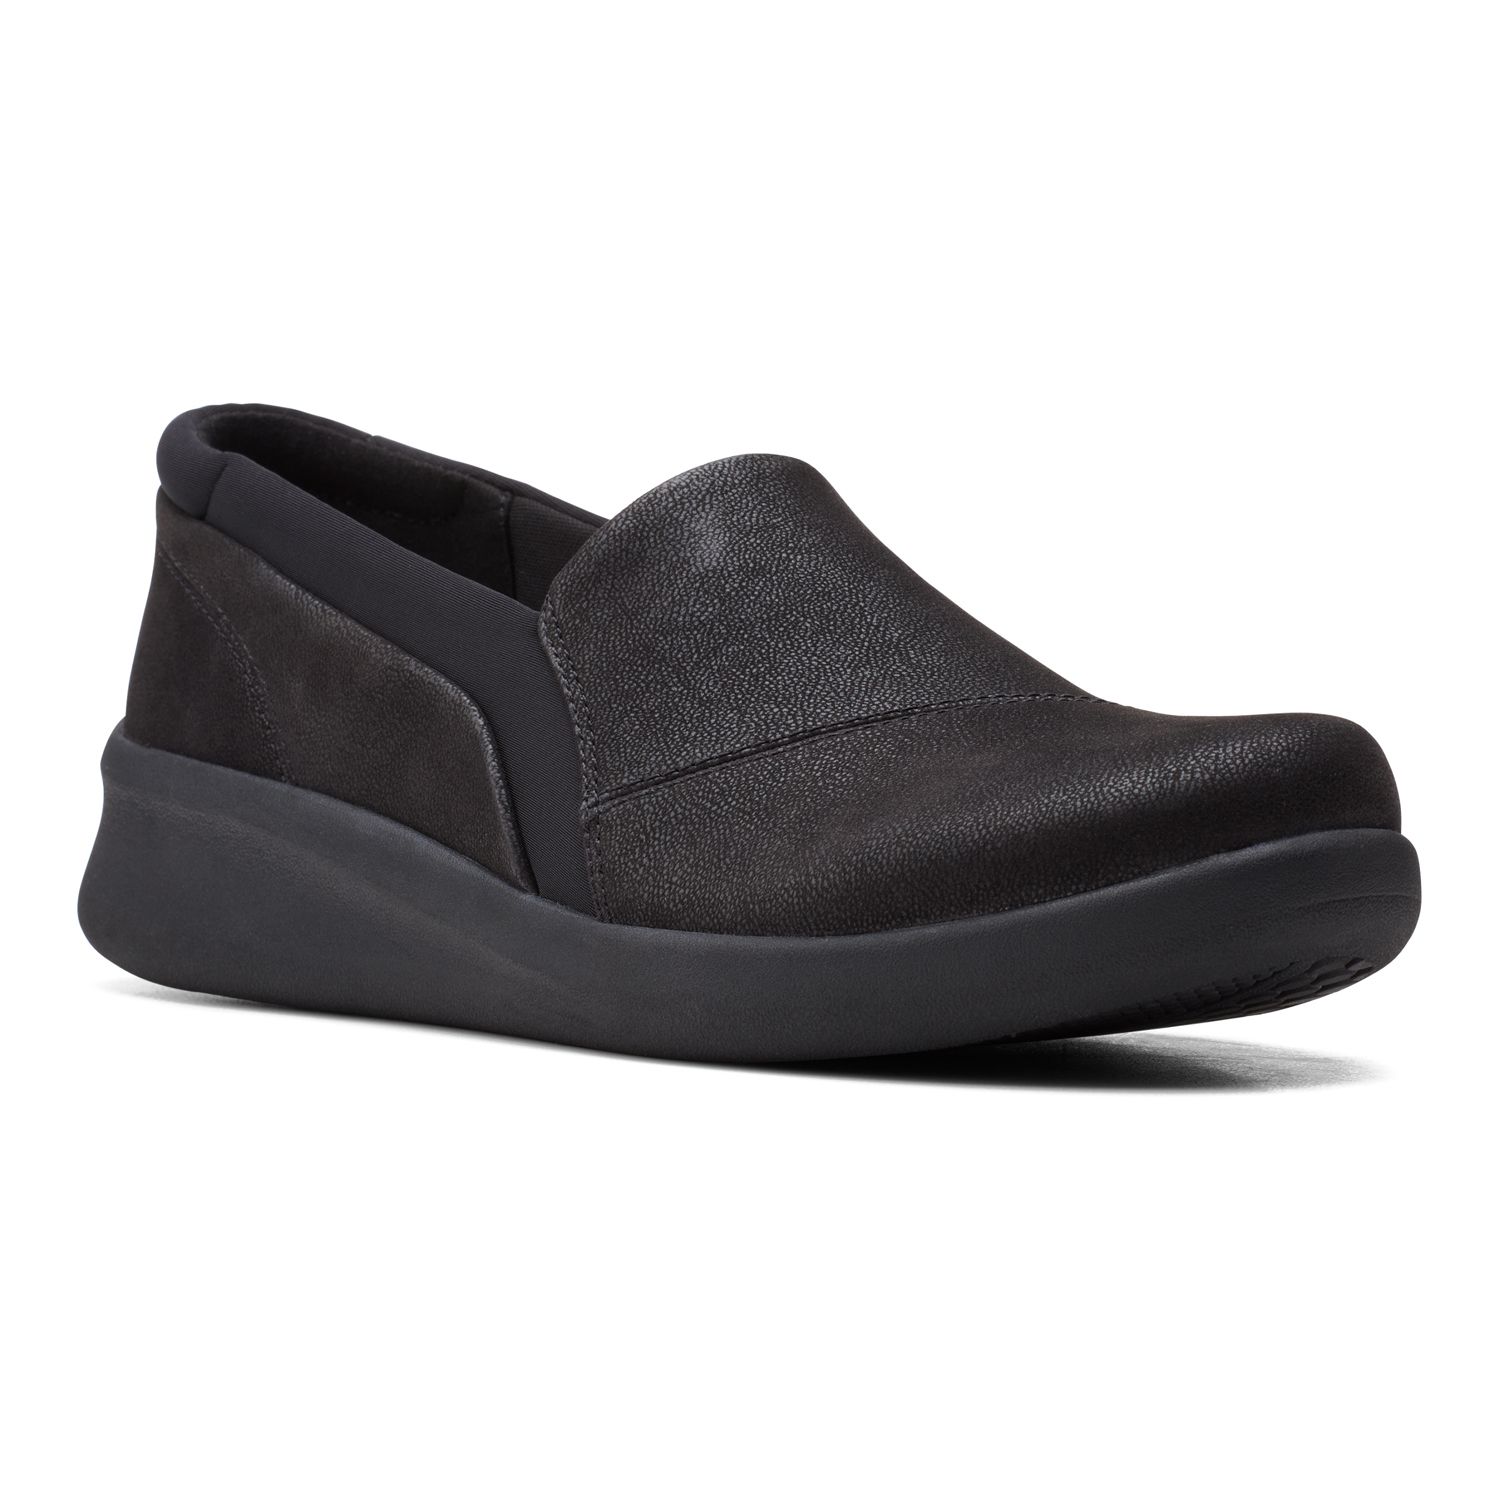 cloudsteppers by clarks loafers